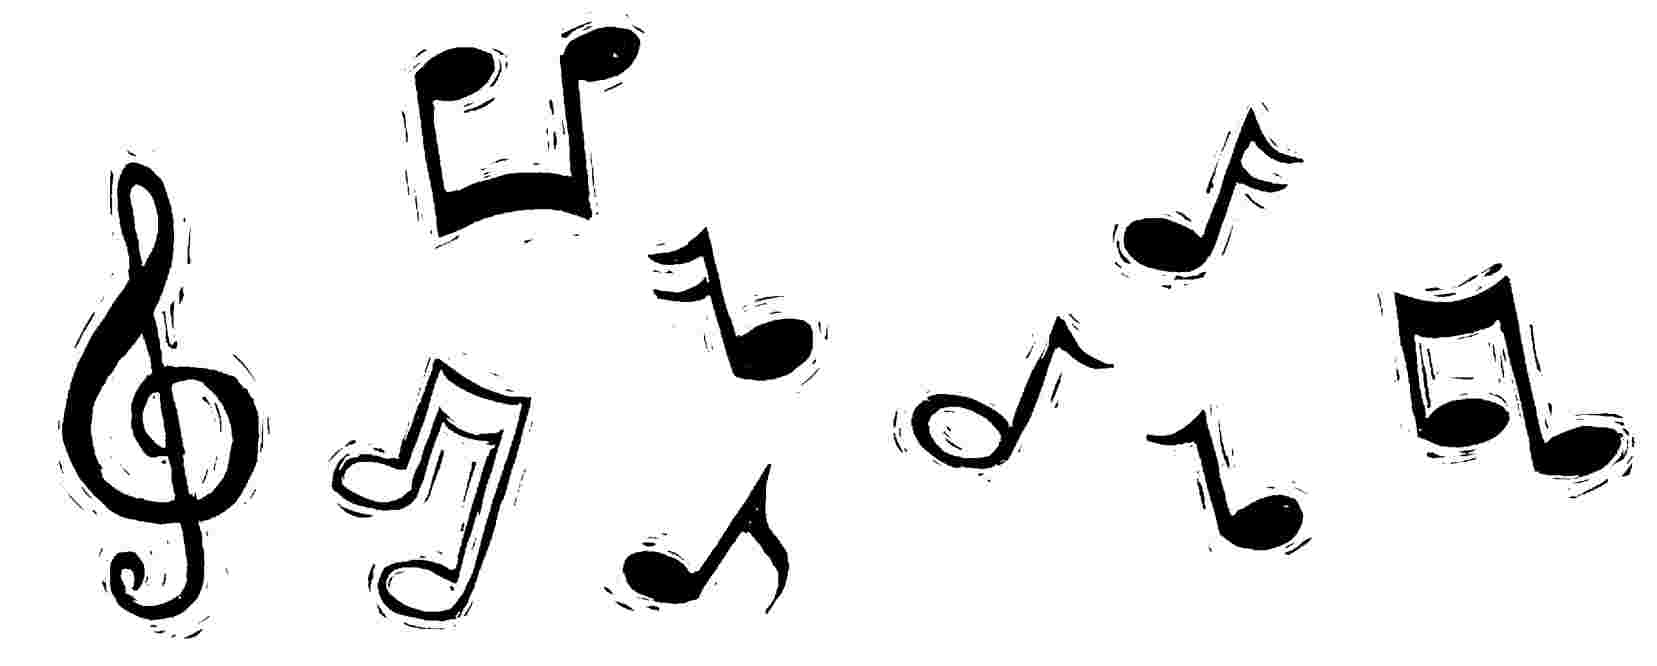 Free Musical Notes Art, Download Free Clip Art, Free Clip